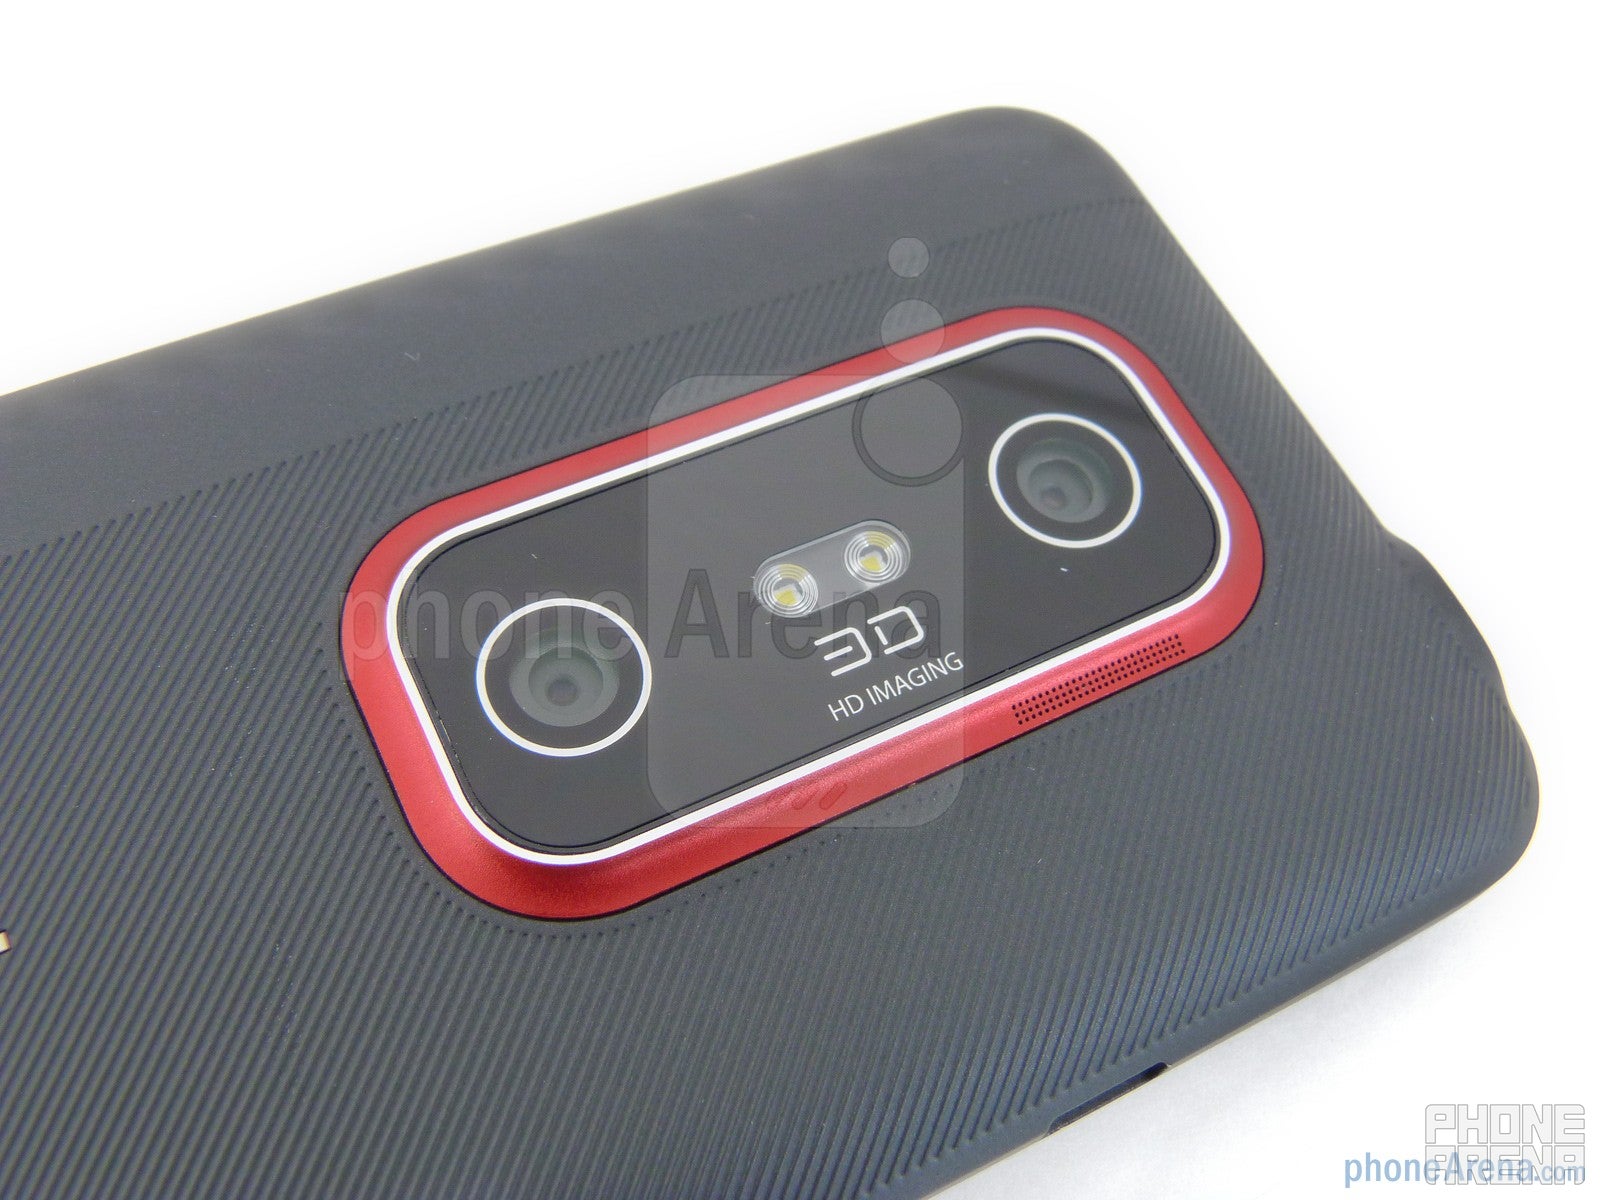 HTC EVO 3D Review